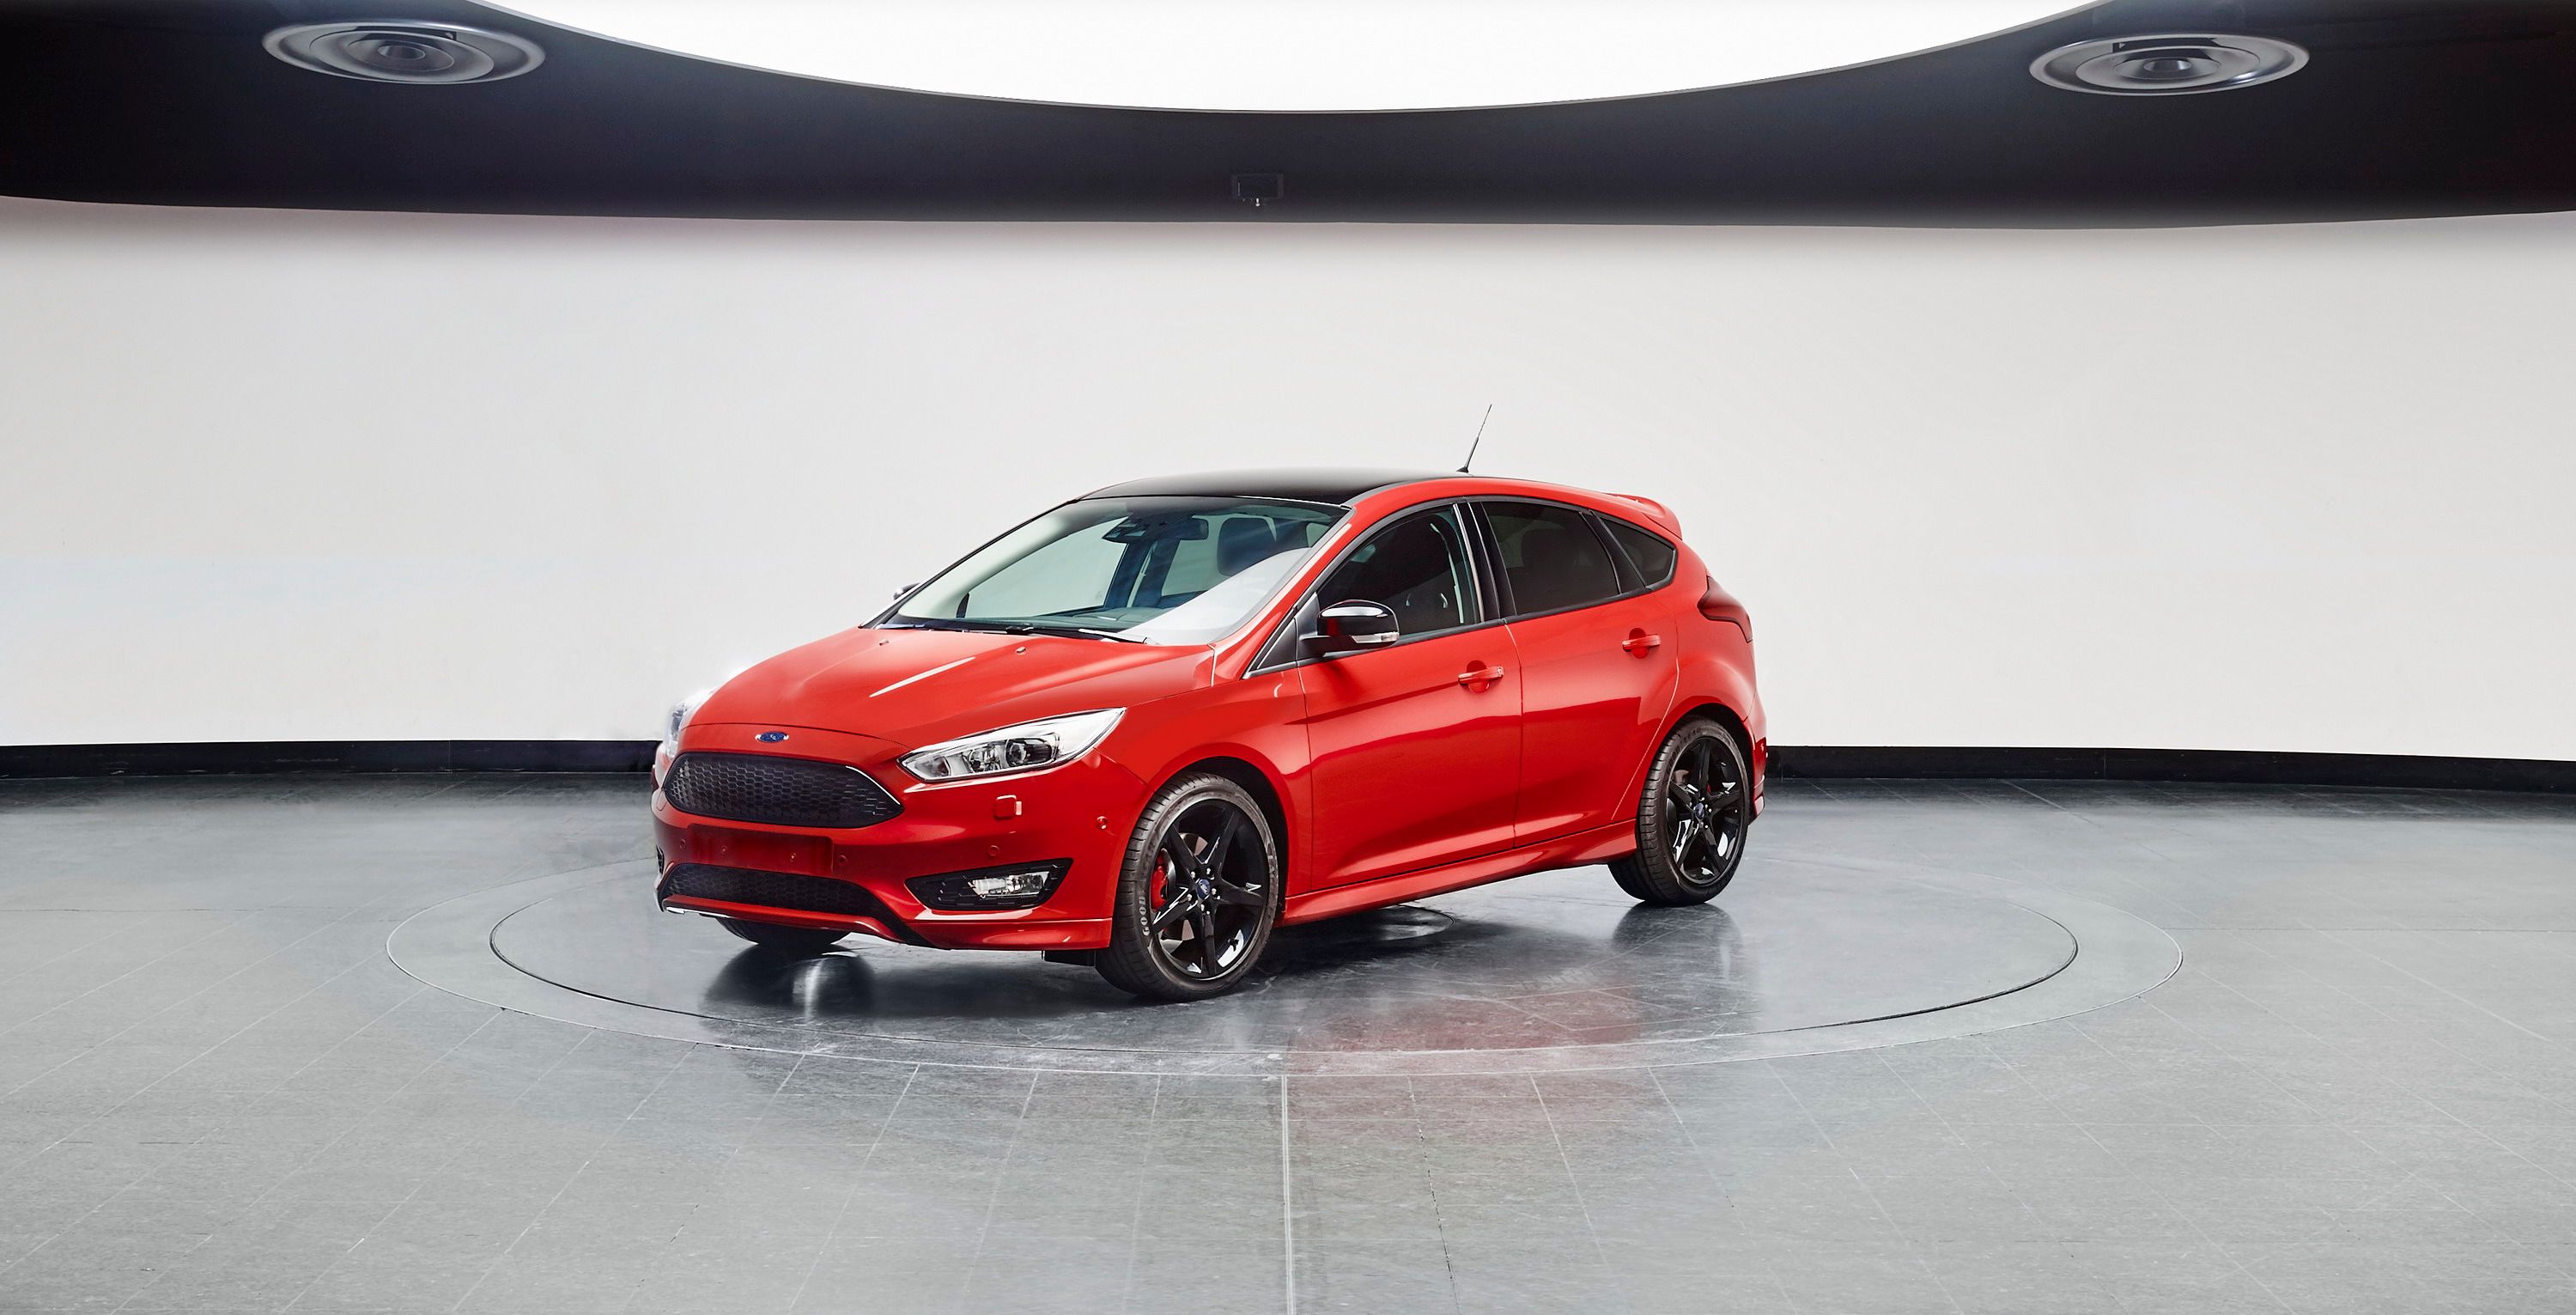 2016 Ford Focus Black & Red Editions